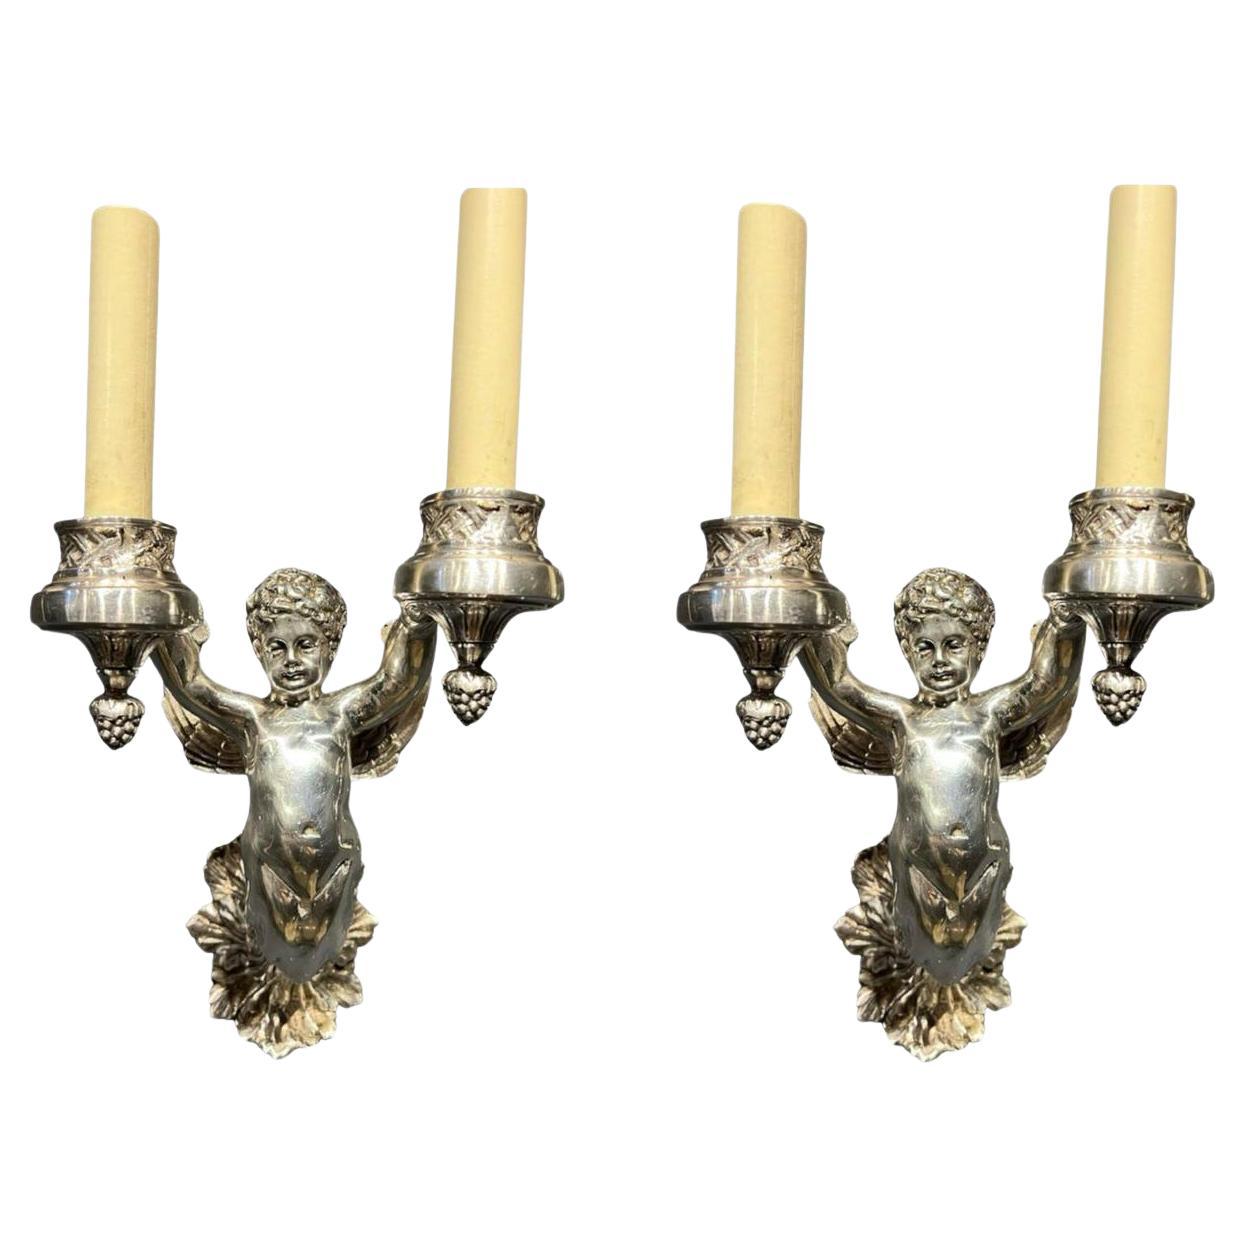 1920's English Silver Plated Cherub Sconces with 2 Lights